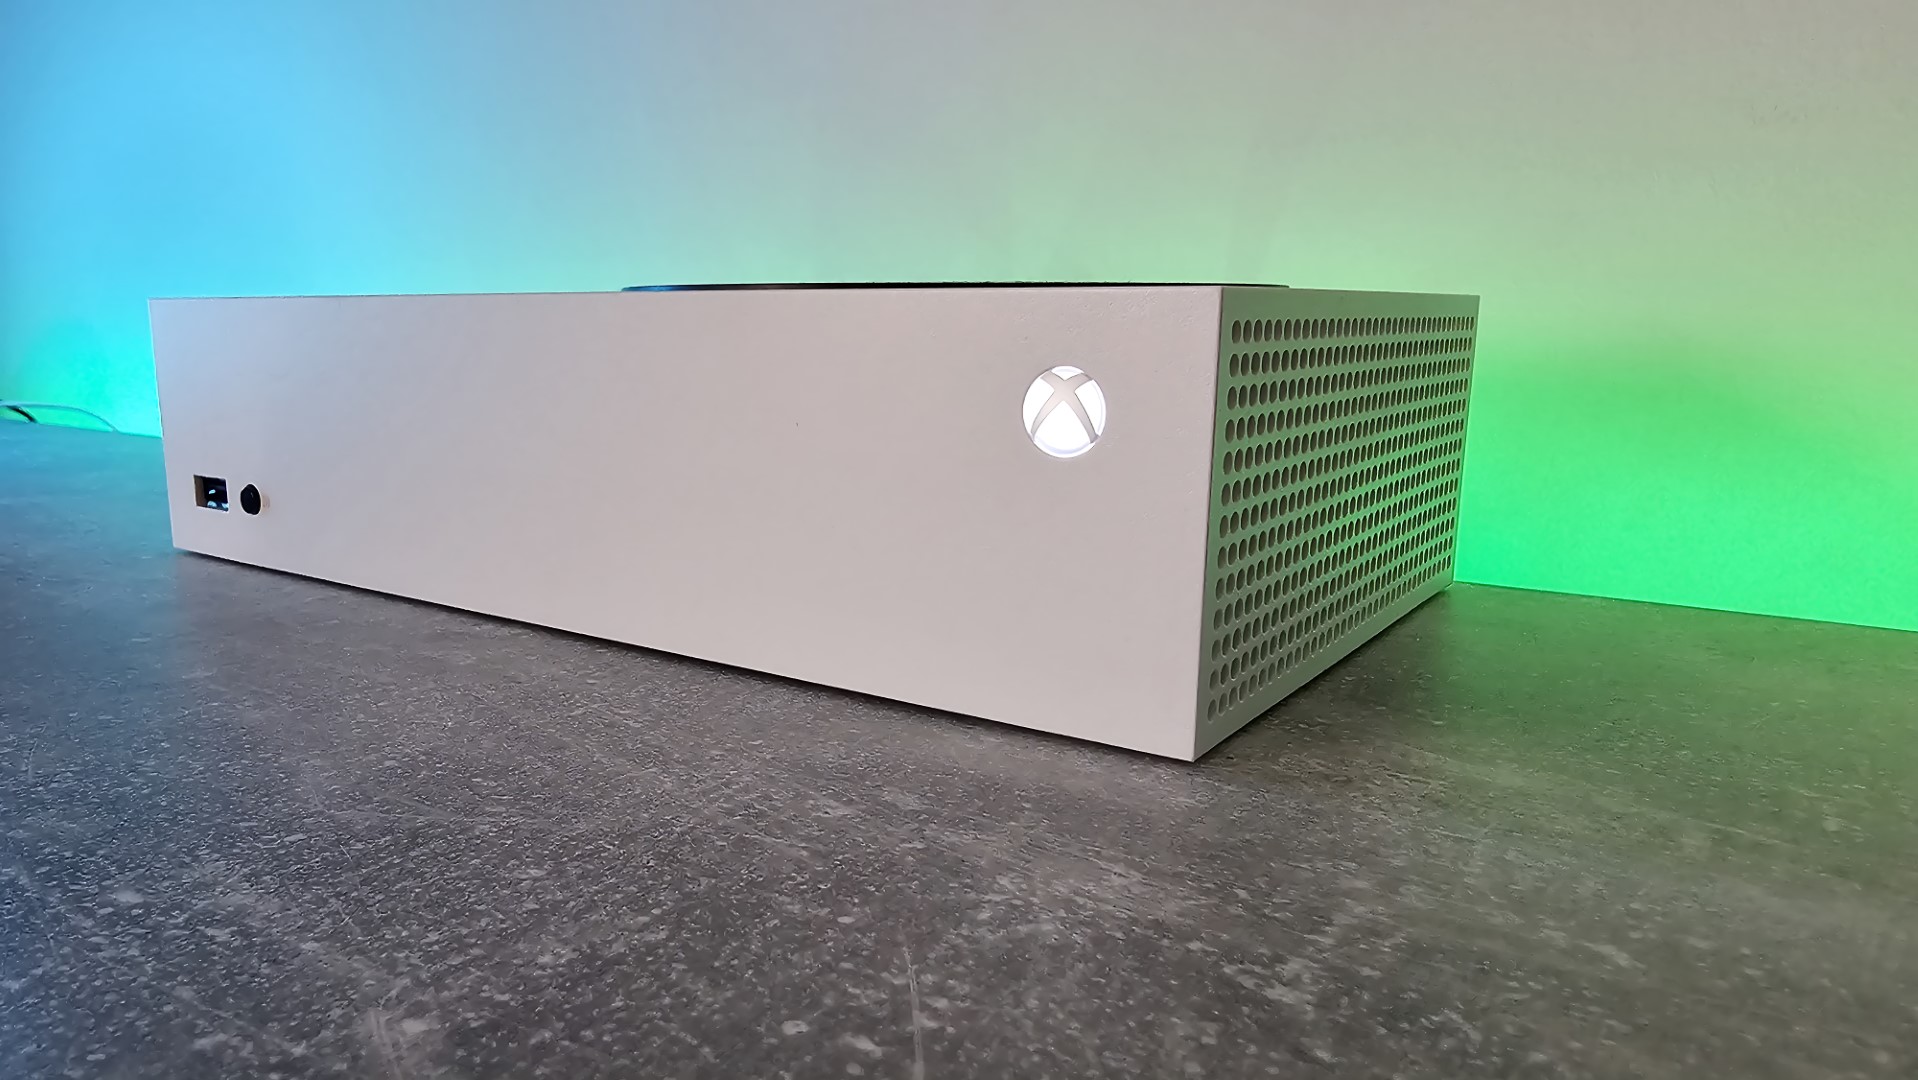 Xbox One S performance boost revealed